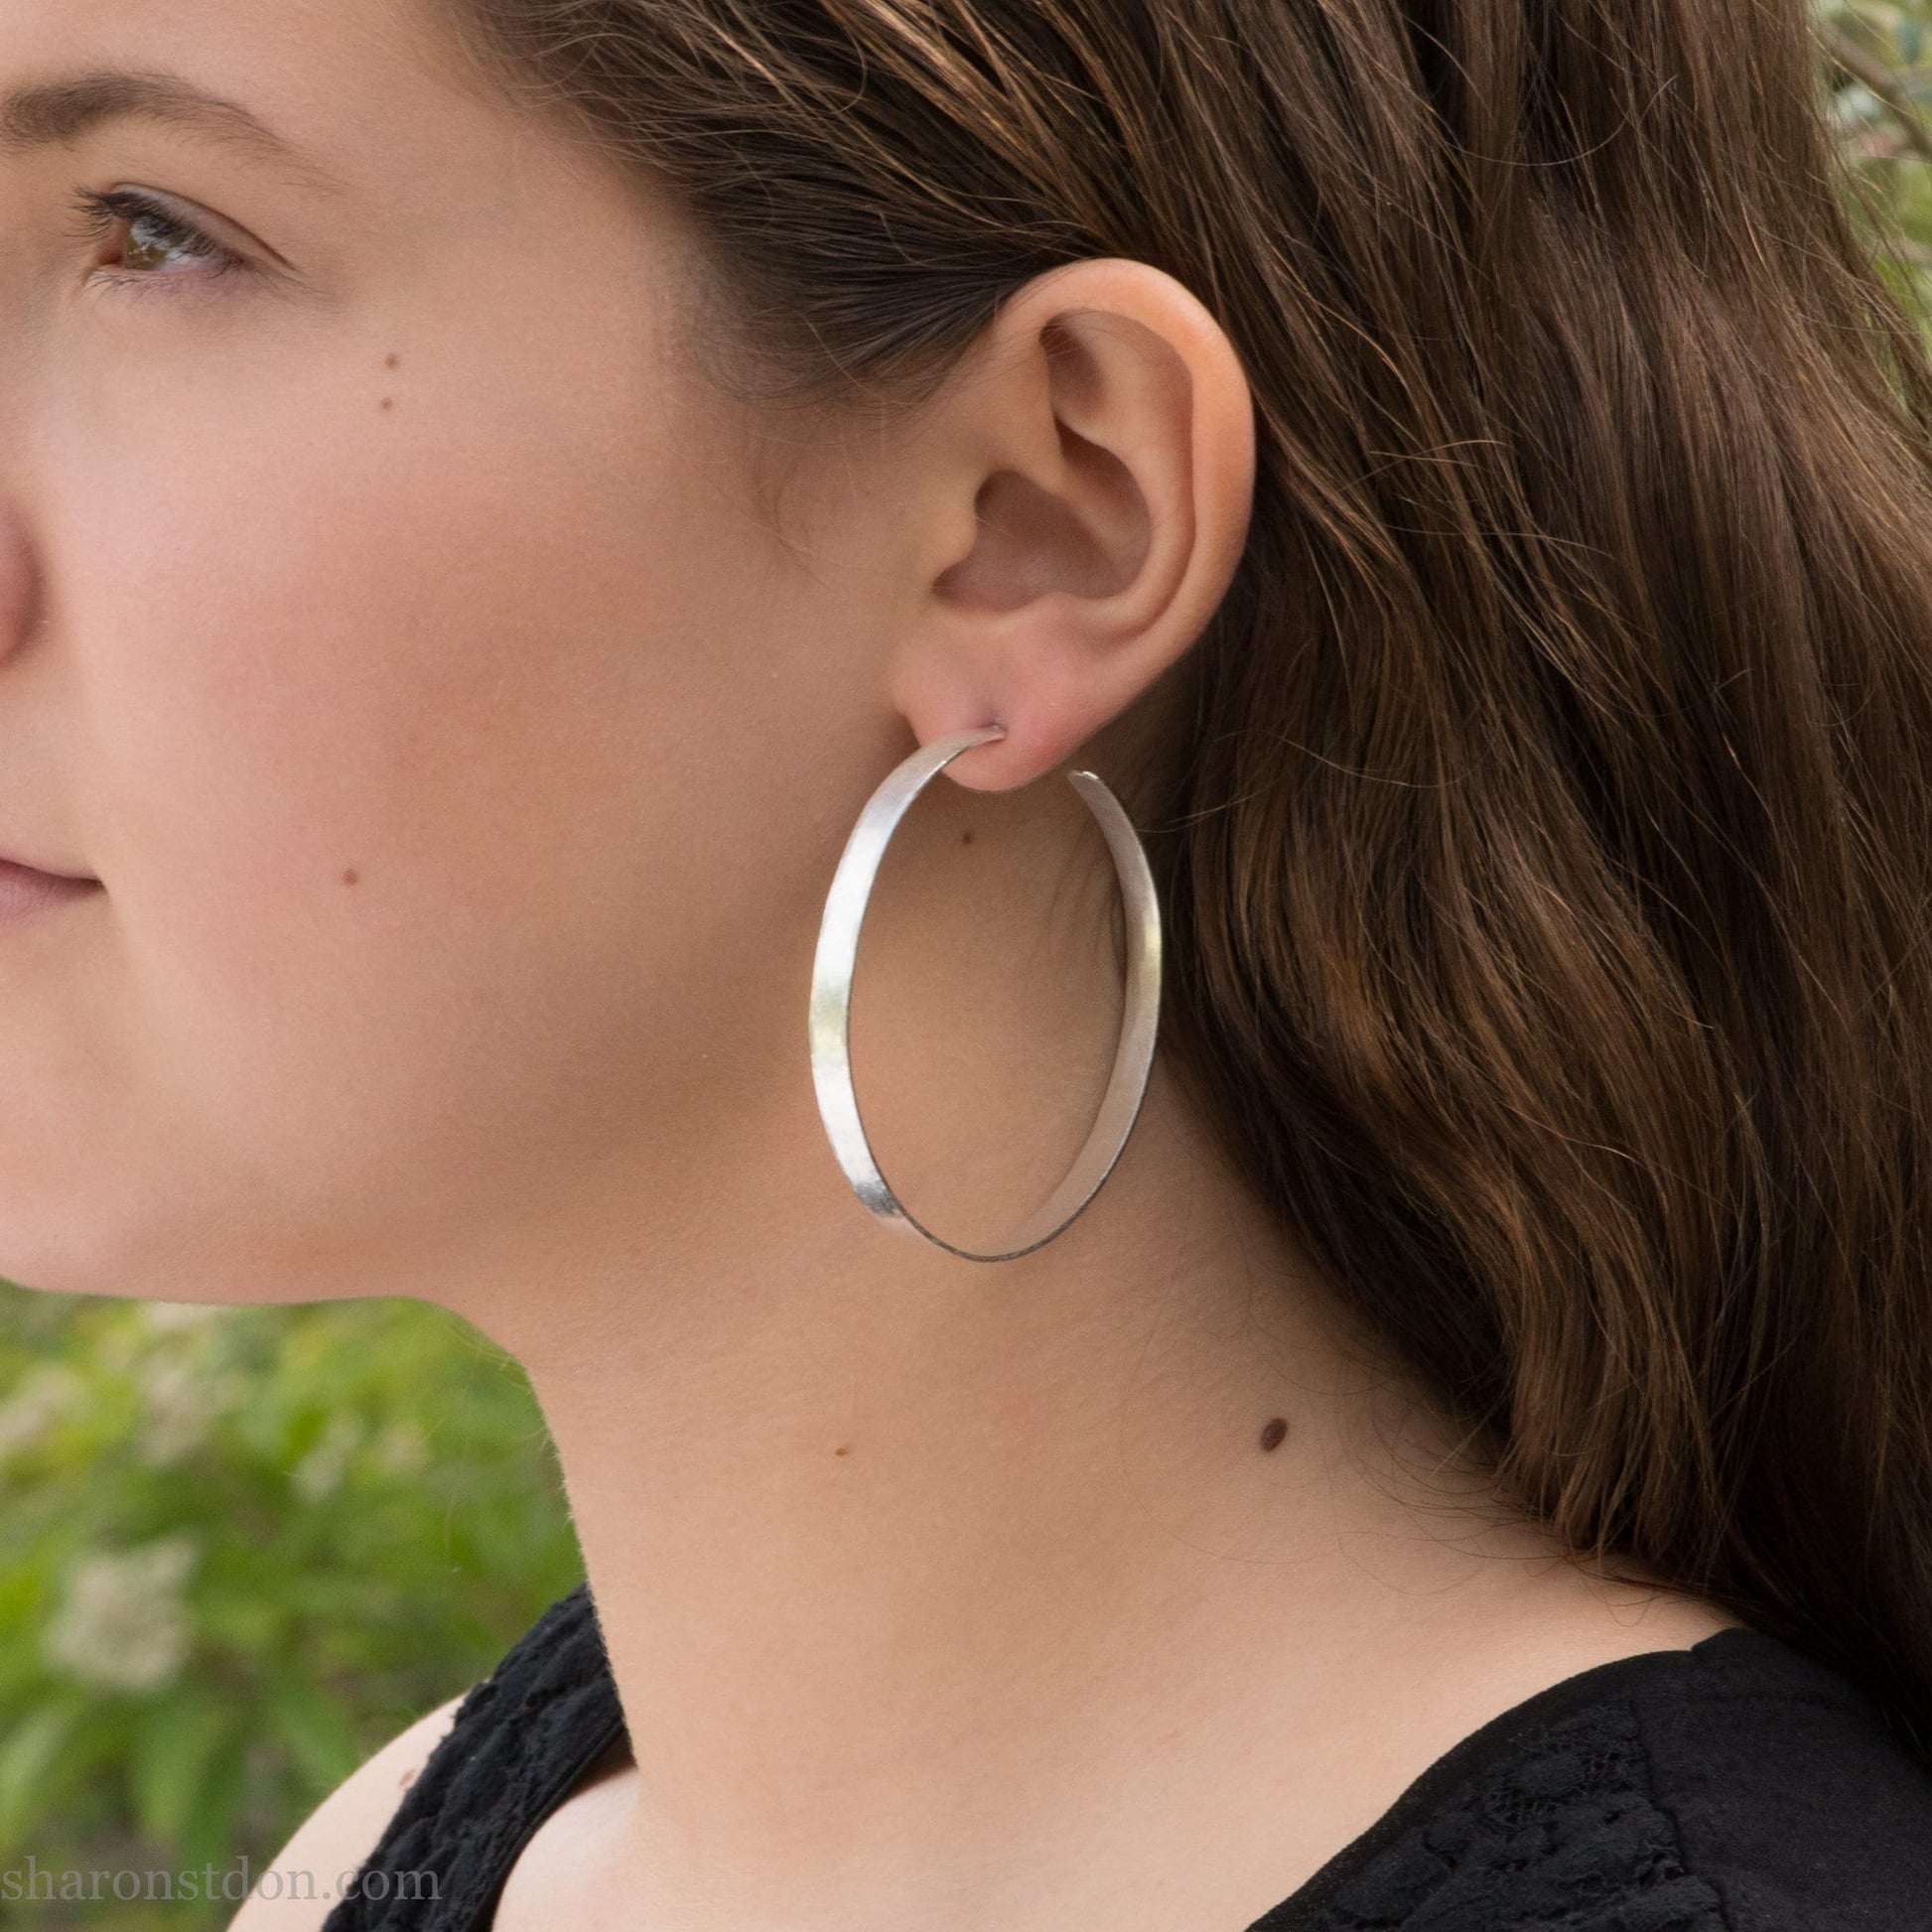 Handmade 925 sterling silver hoop earrings for women. 55mm diameter, 5mm wide, hammered texture with brushed, matte silver finish. Comfortable and lightweight for daily wear.